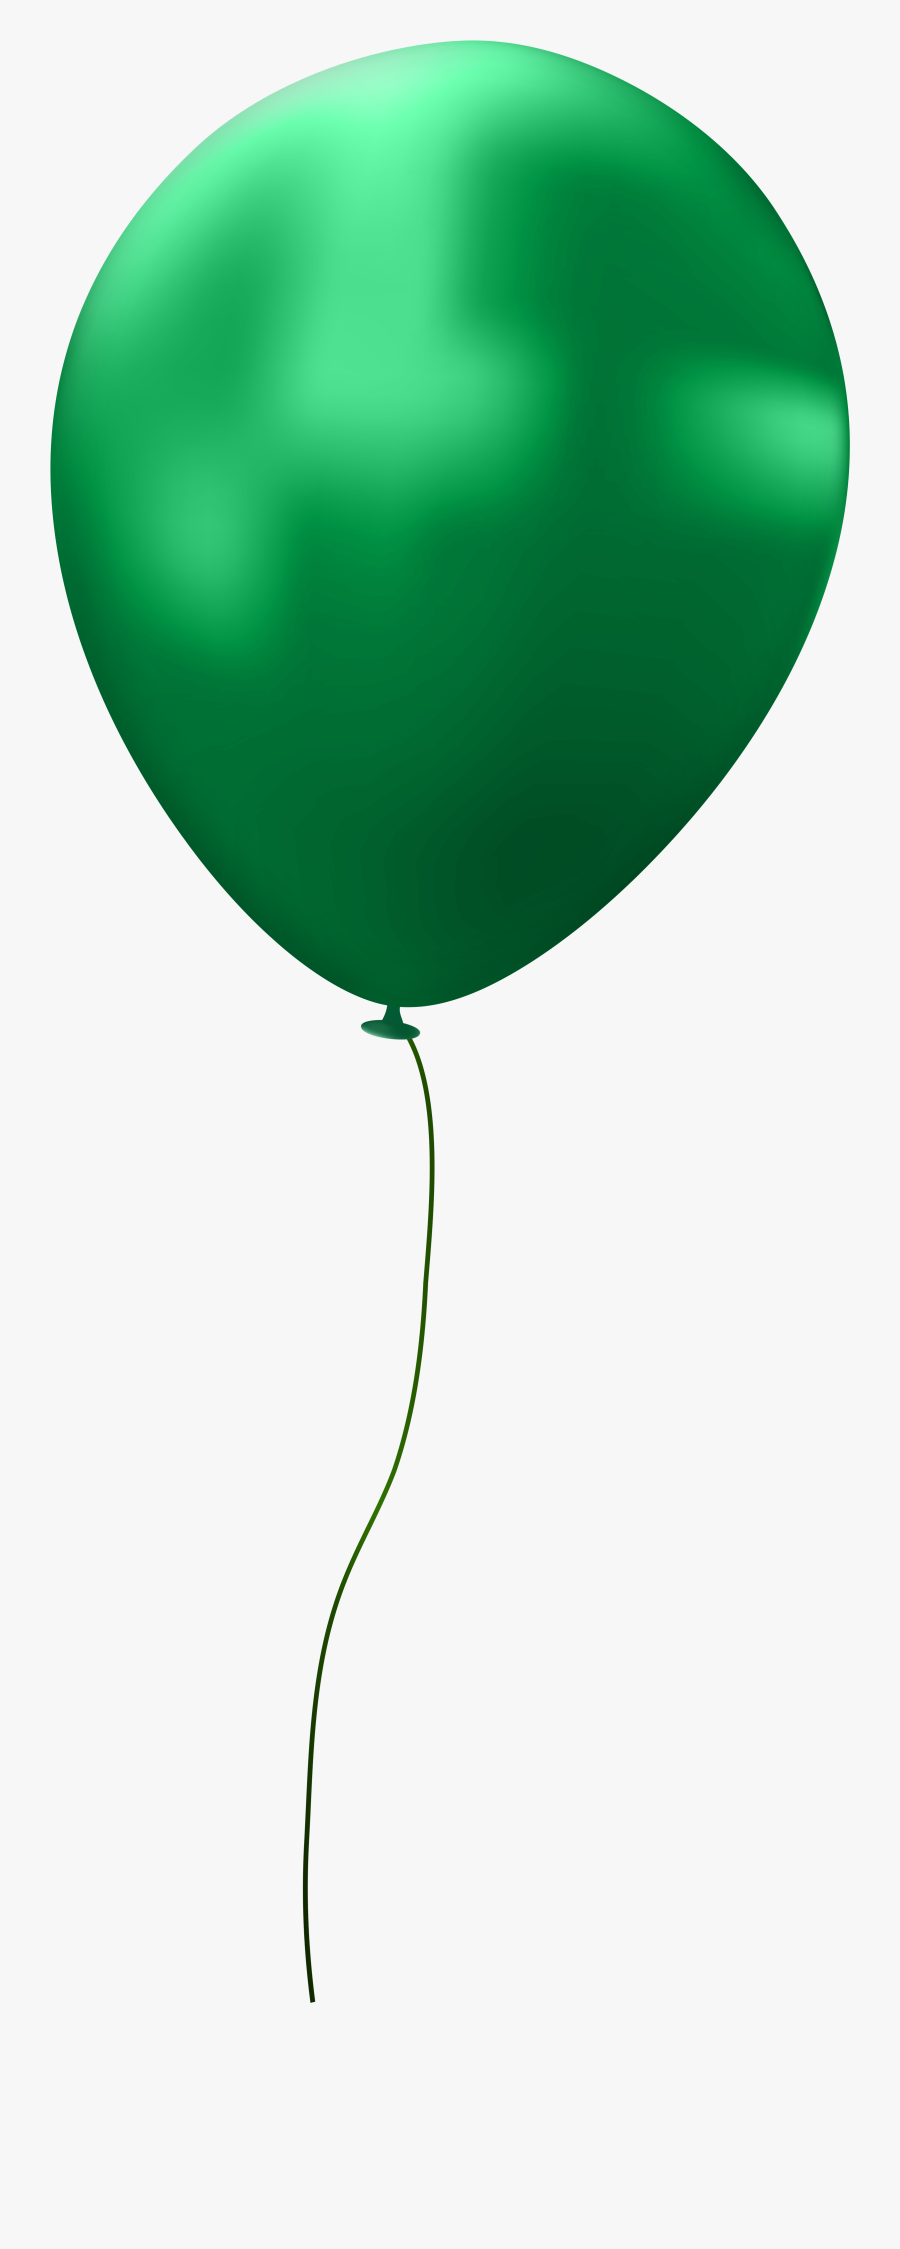 Single Balloon Images Png, Transparent Clipart